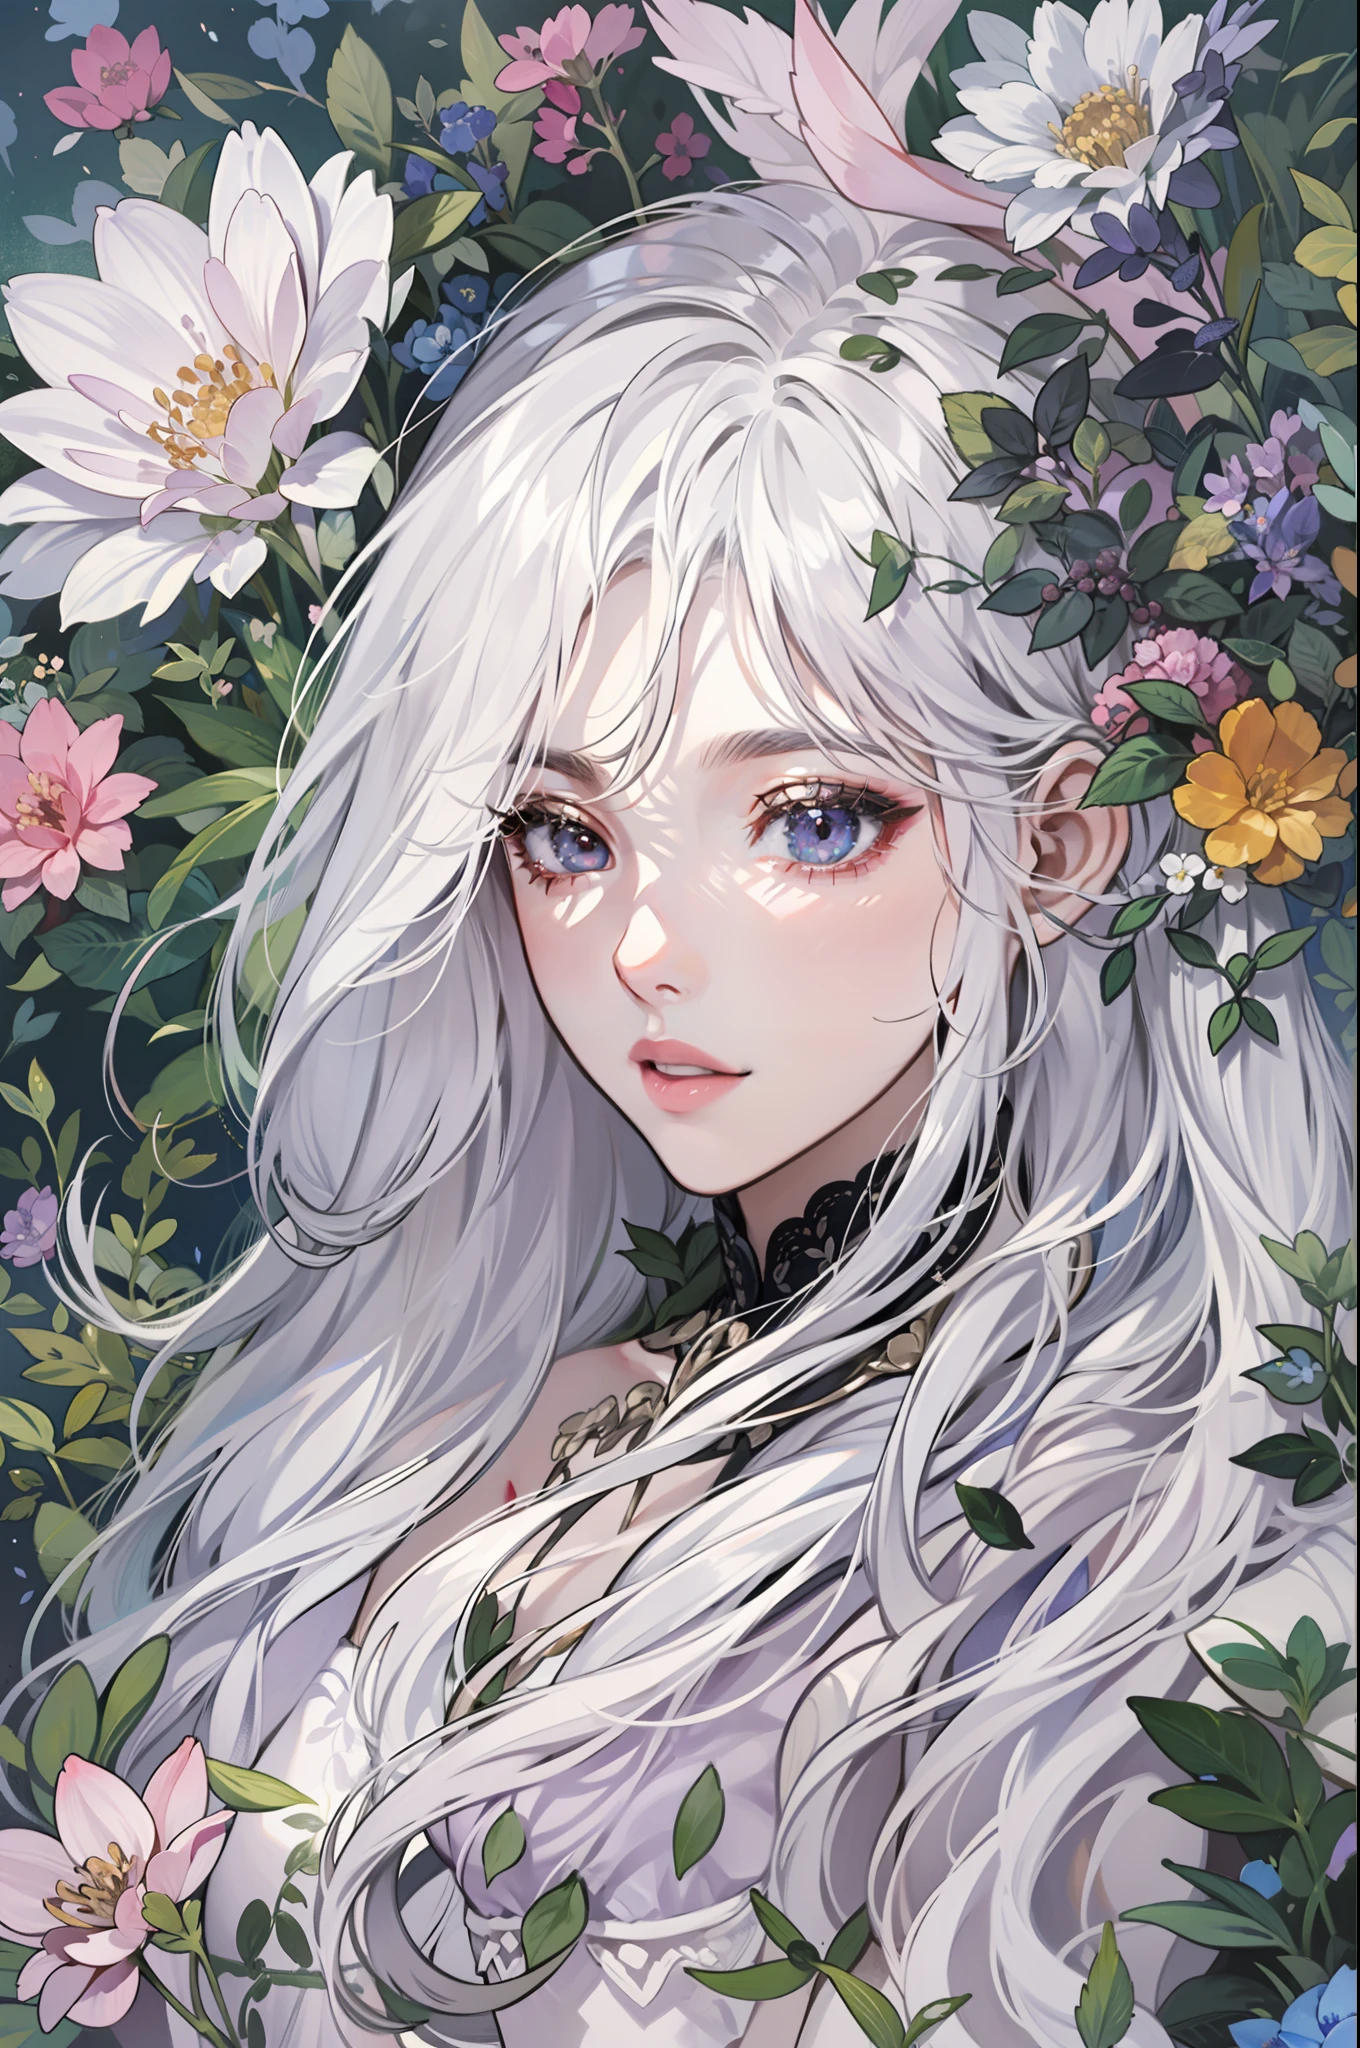 A woman with long silver-white hair lies on the turf，Silvery-white hair，Long hair scattered，Purple eye，((Black dress))，The turf is filled with various flowers，Colorful，Light，Texture，Natural causes，Exquisite and beautiful details，(Eye details），Very detailed illustration